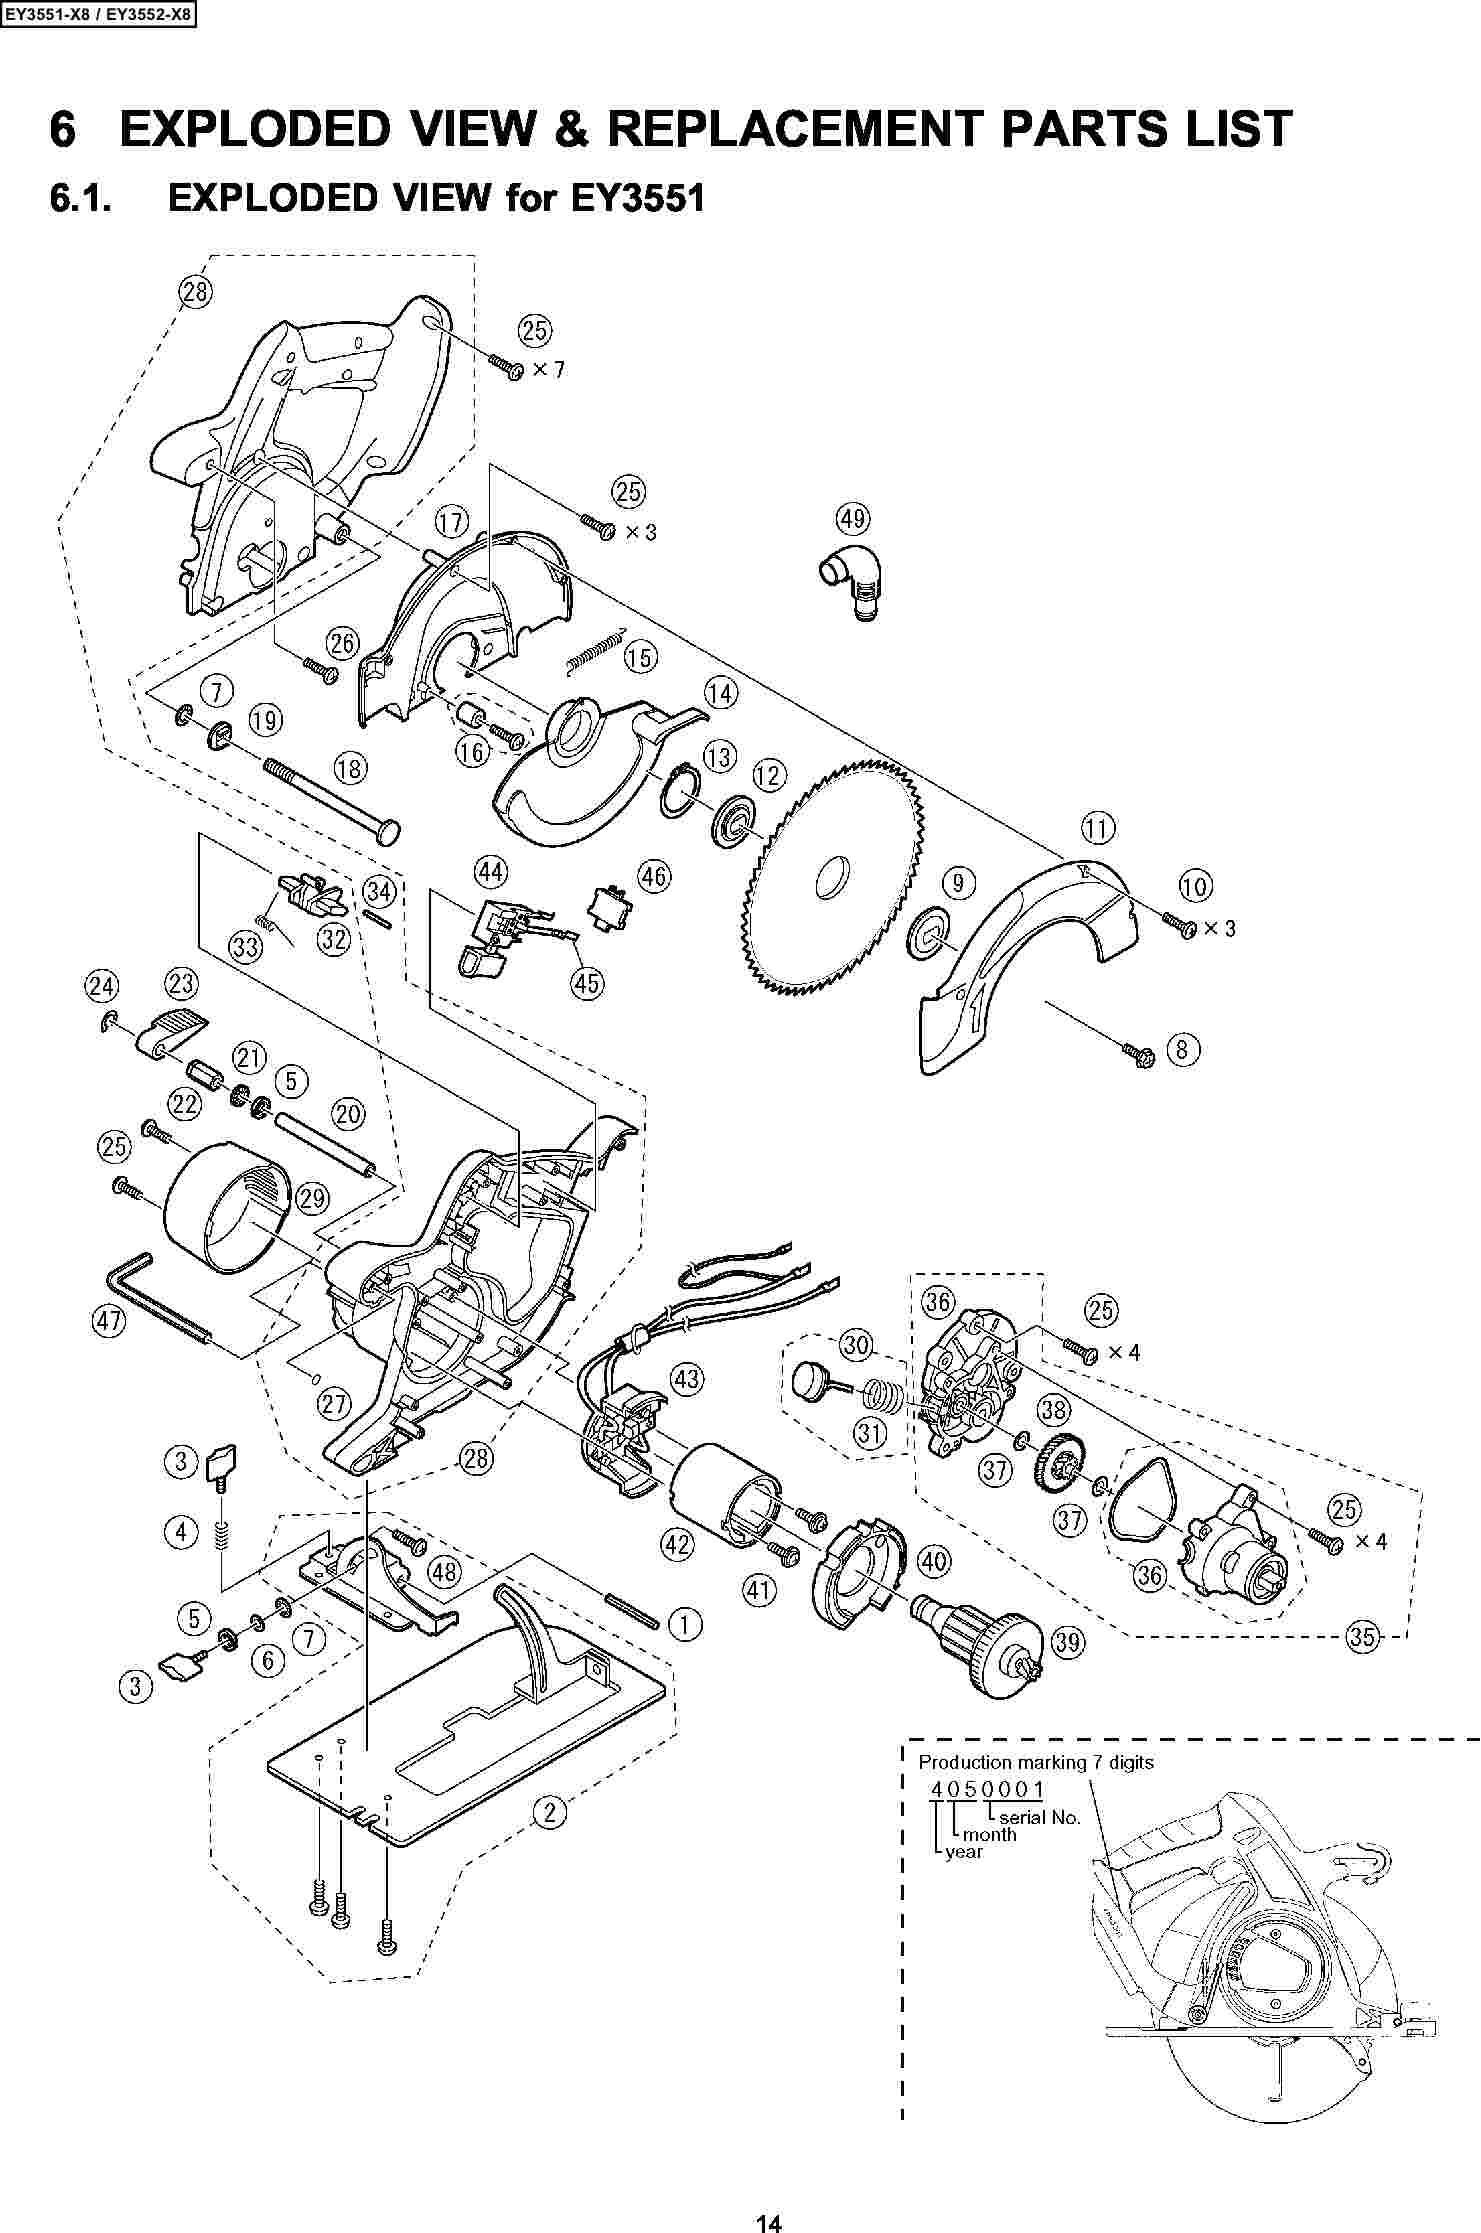 EY3551: Exploded View